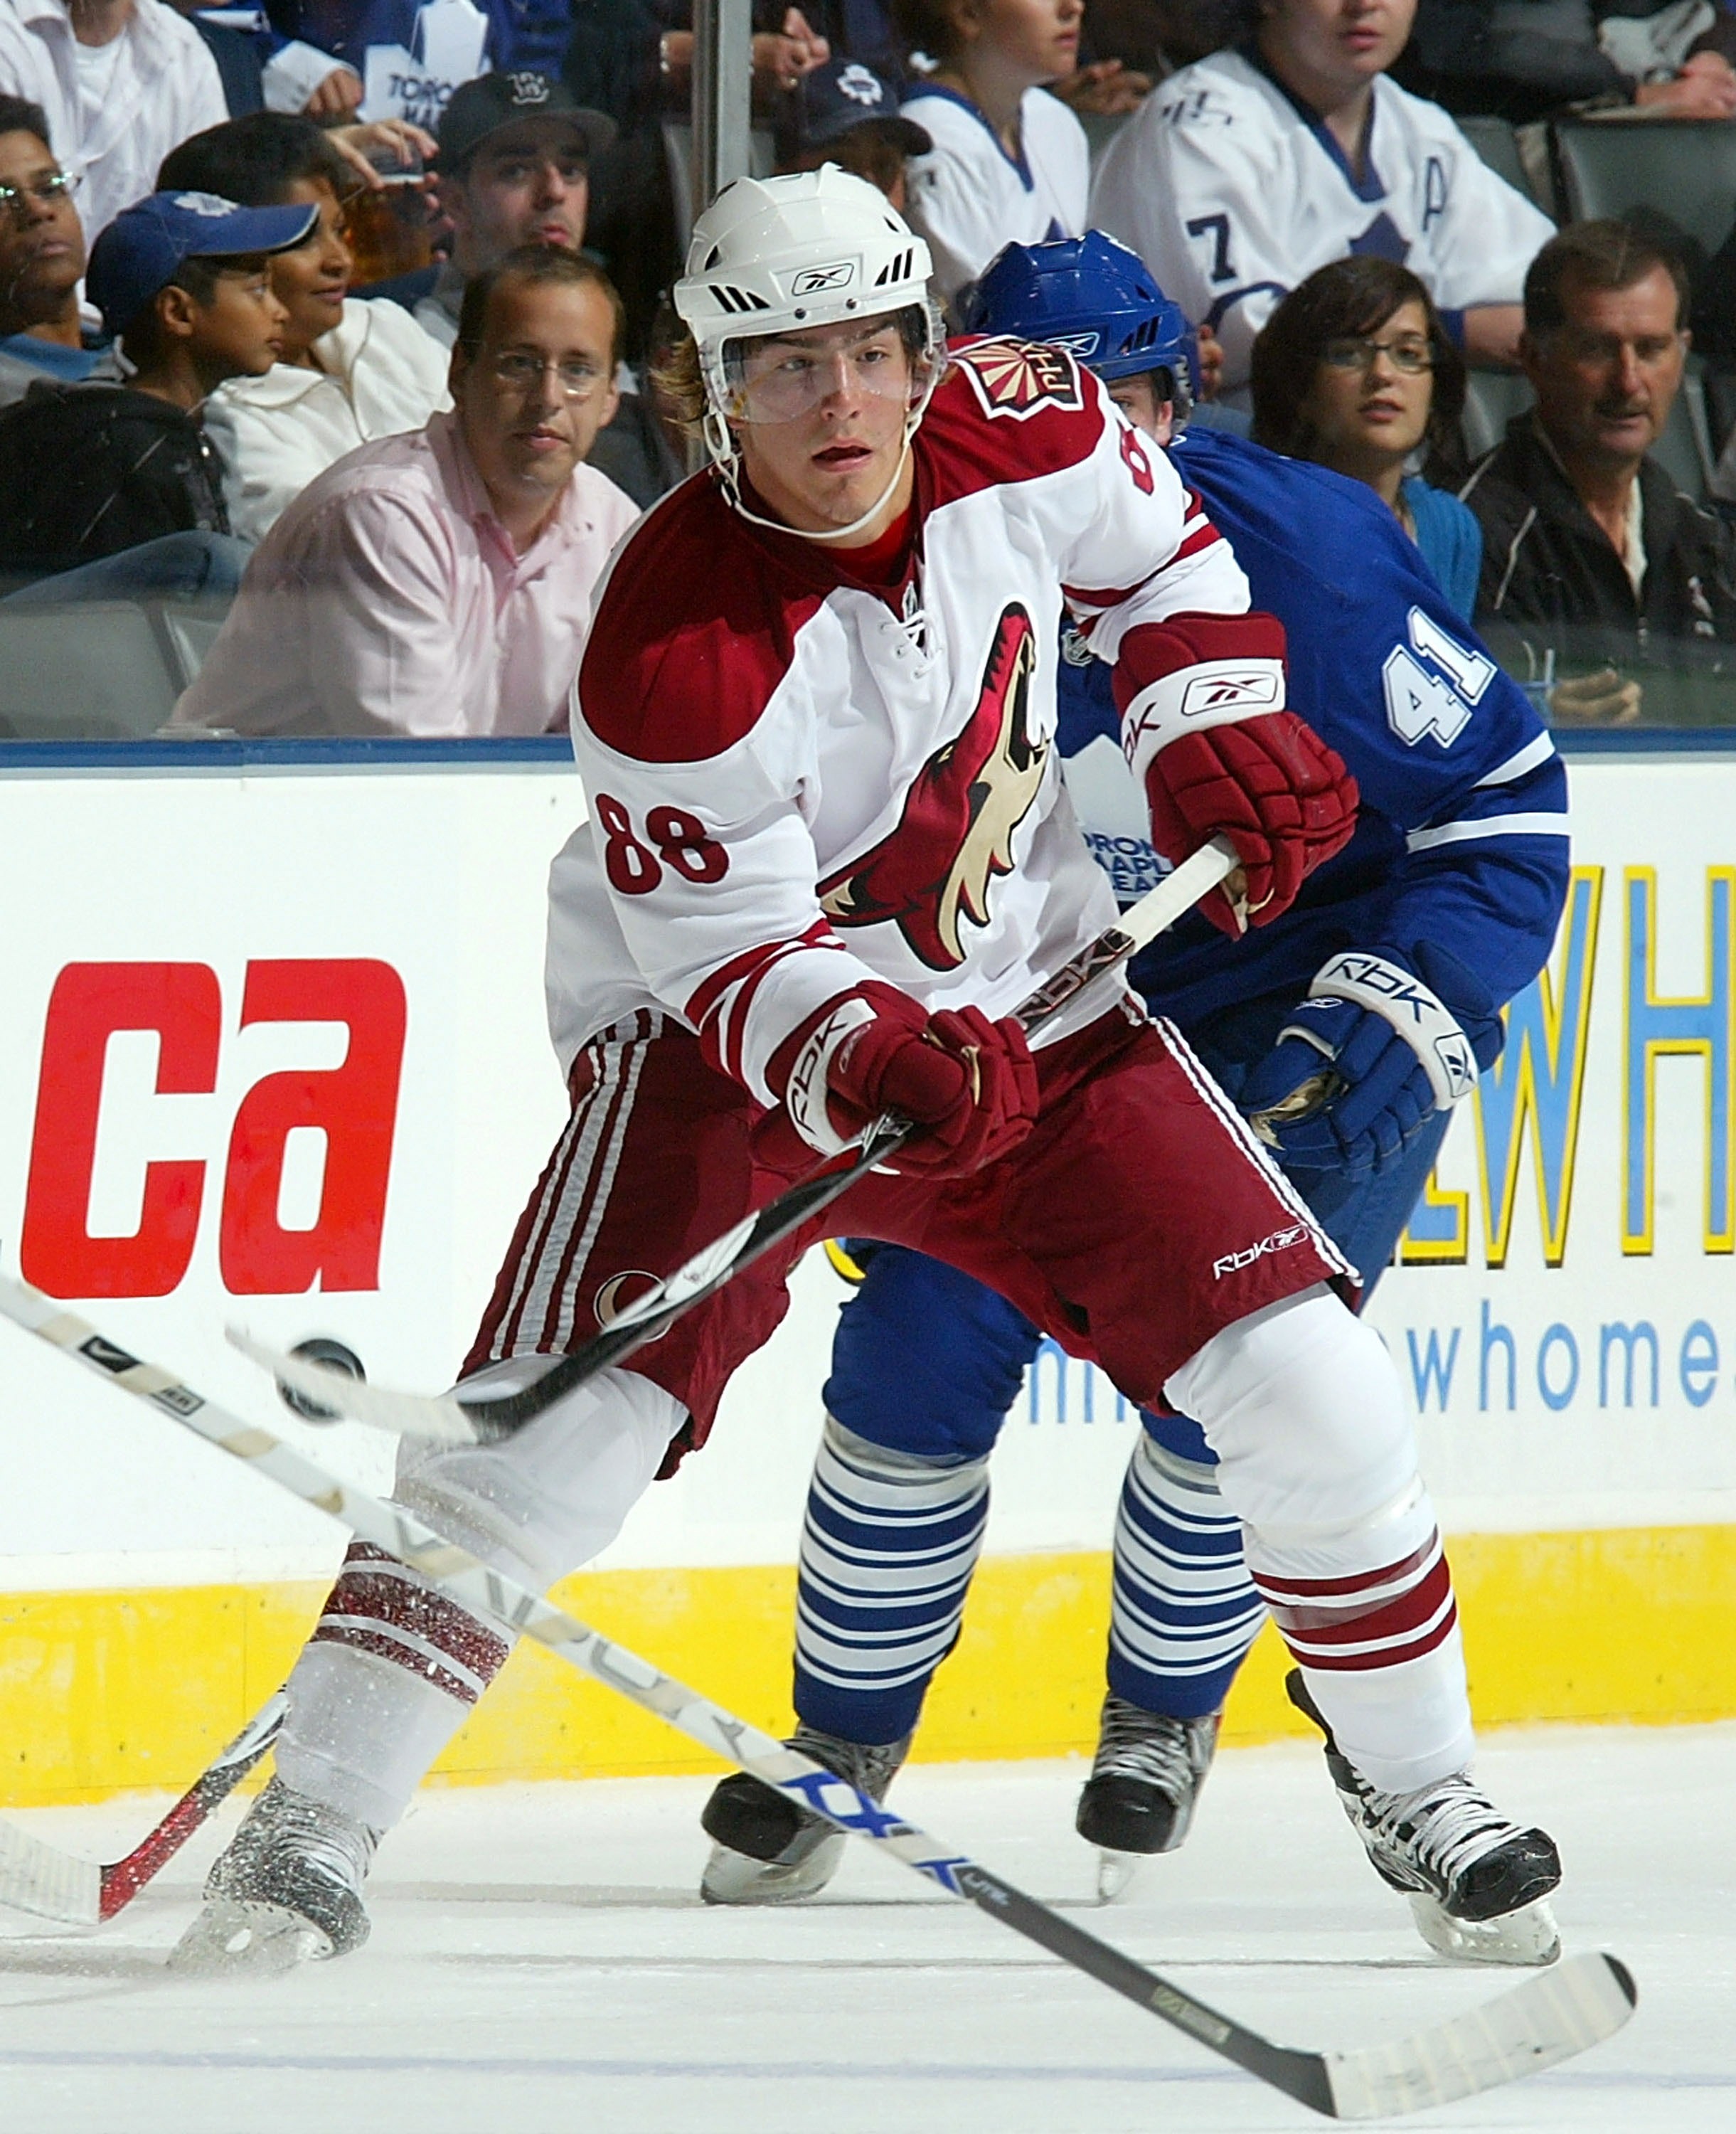 TORONTO - SEPTEMBER 20:  Peter Mueller #88 of the Phoenix Coyotes makes a pass while facing the Toronto Maple Leafs during their NHL game at the Air Canada Centre September 20, 2007 in Toronto, Ontario.(Photo By Dave Sandford/Getty Images)